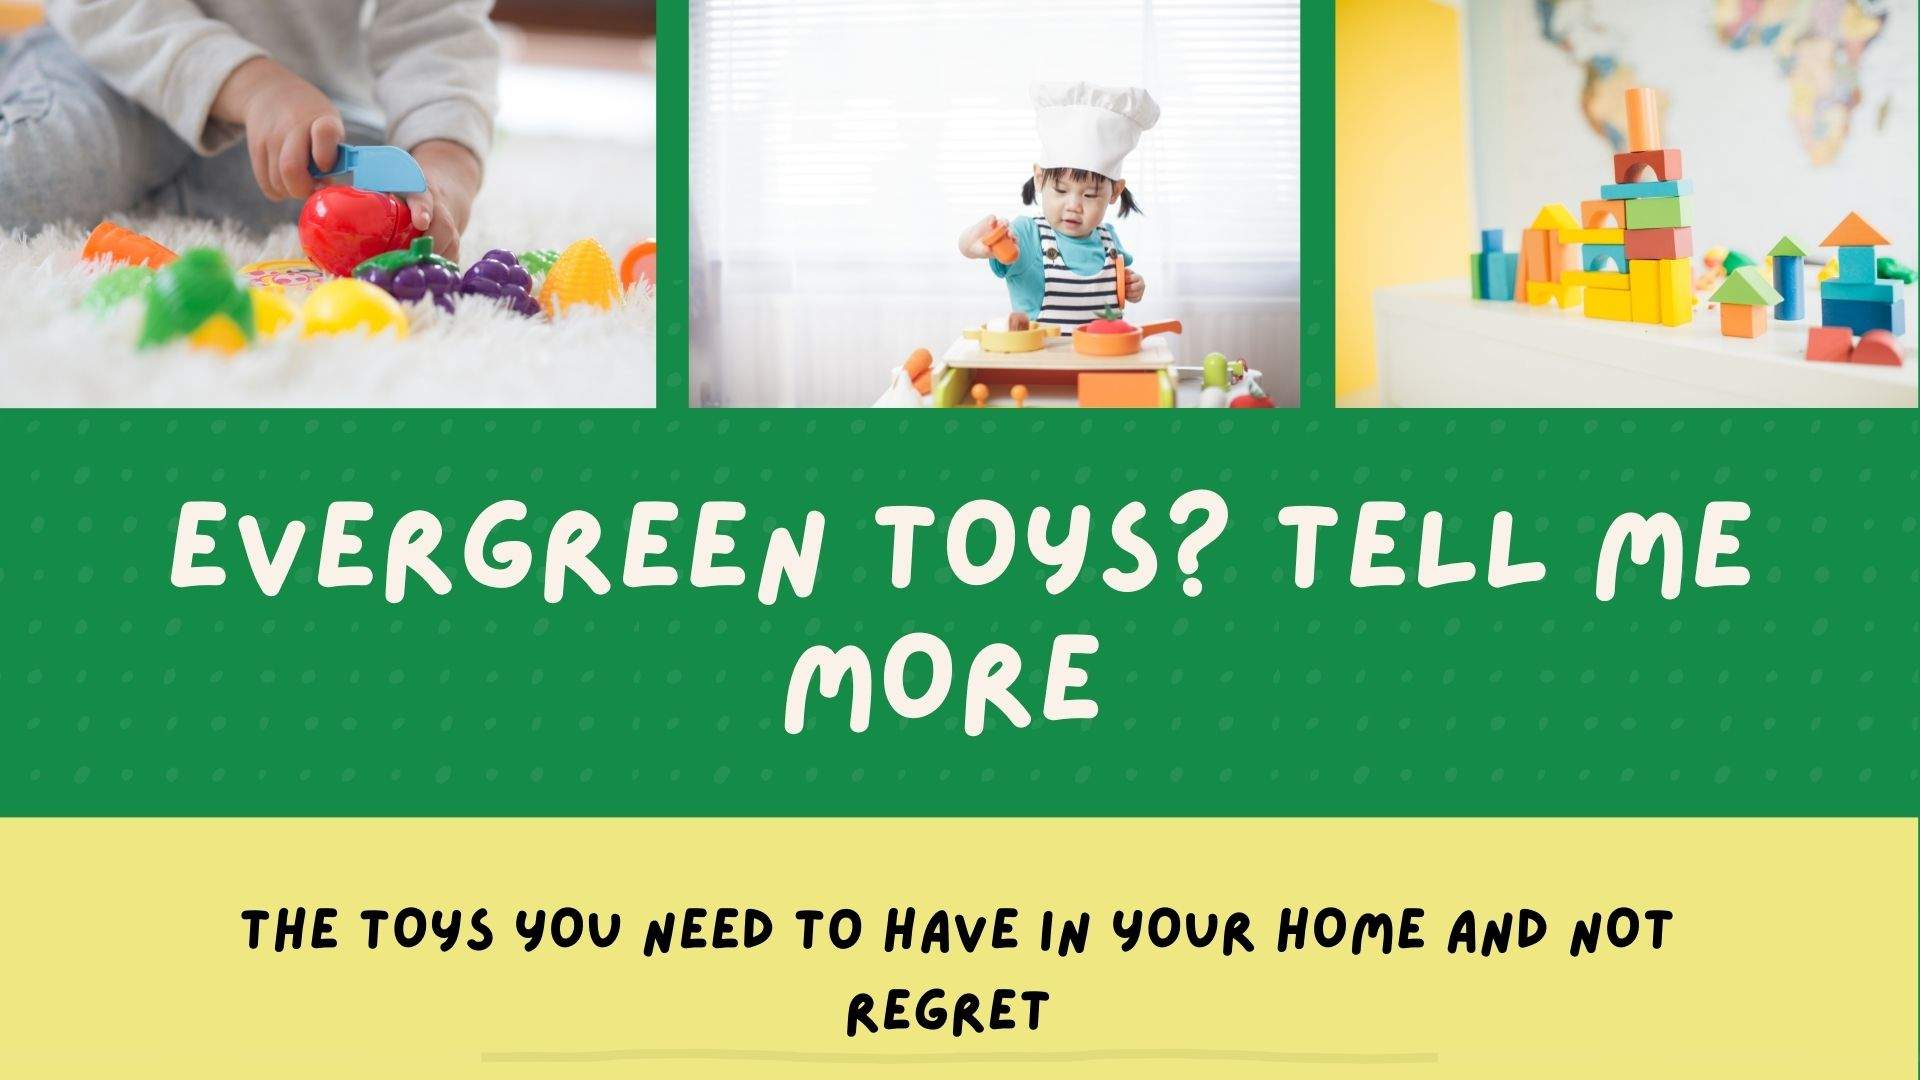 Evergreen toys that should be in your home